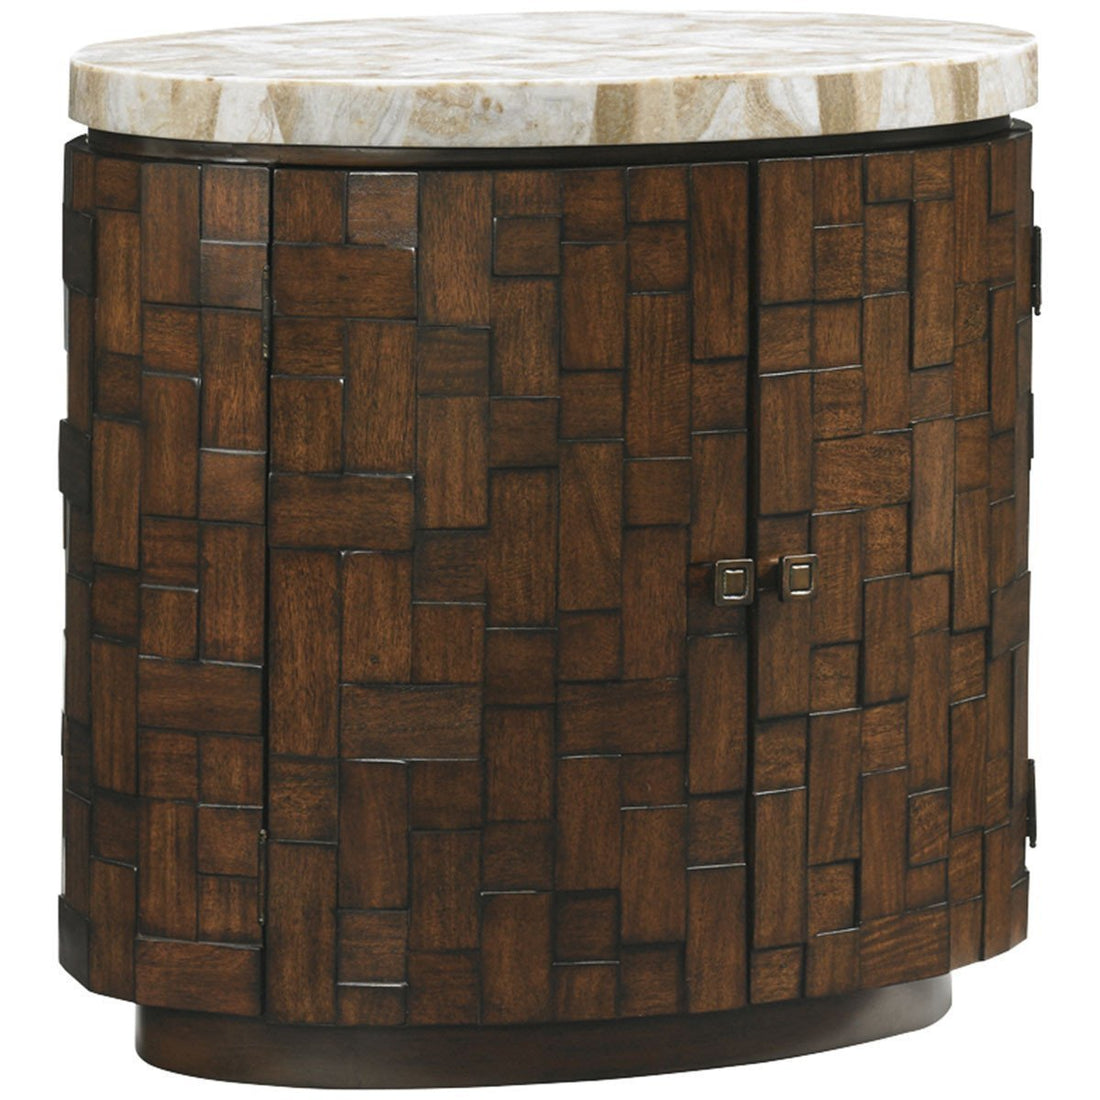 Tommy Bahama Island Fusion Banyan Oval Accent Table